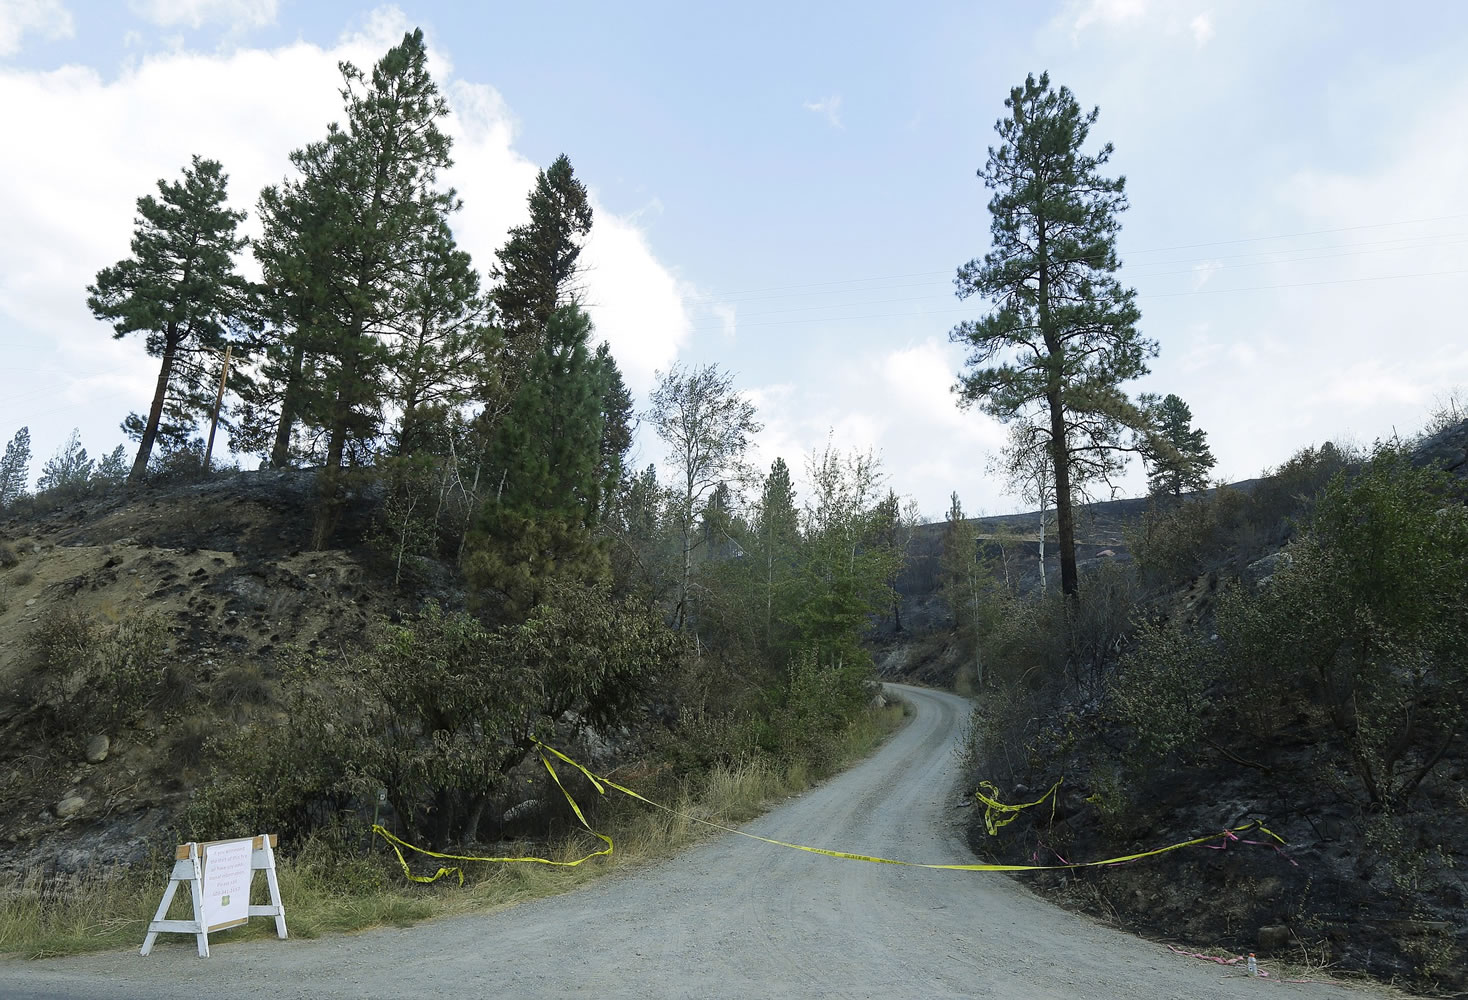 Woods Canyon Road, where three firefighters were killed Aug. 19 while fighting a wildfire near Twisp, is seen Aug. 21. The firefighters died after their engine rushed up a steep gravel road and crashed down a 40-foot embankment. Before they could escape, they were overrun by flames.